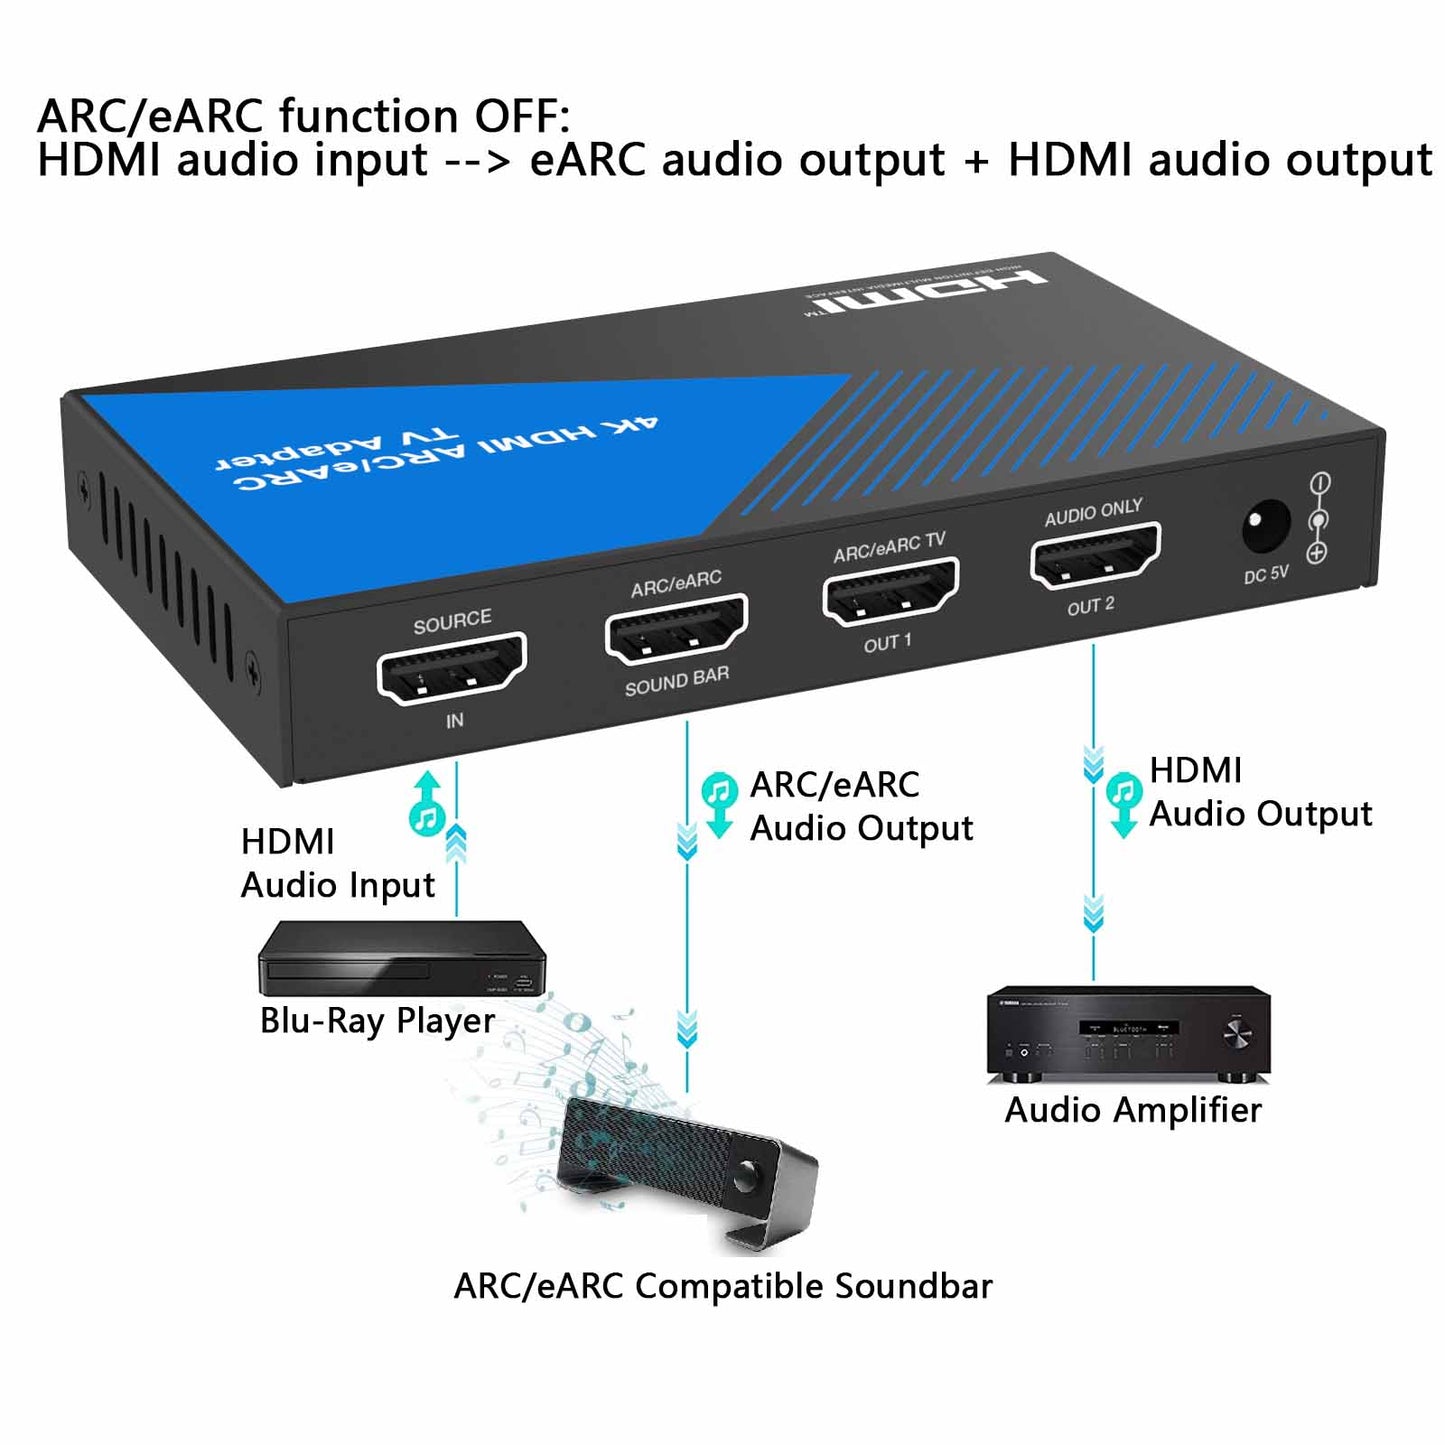 4K HDMI ARC/eARC Audio Adapter Converter eARC OFF connection